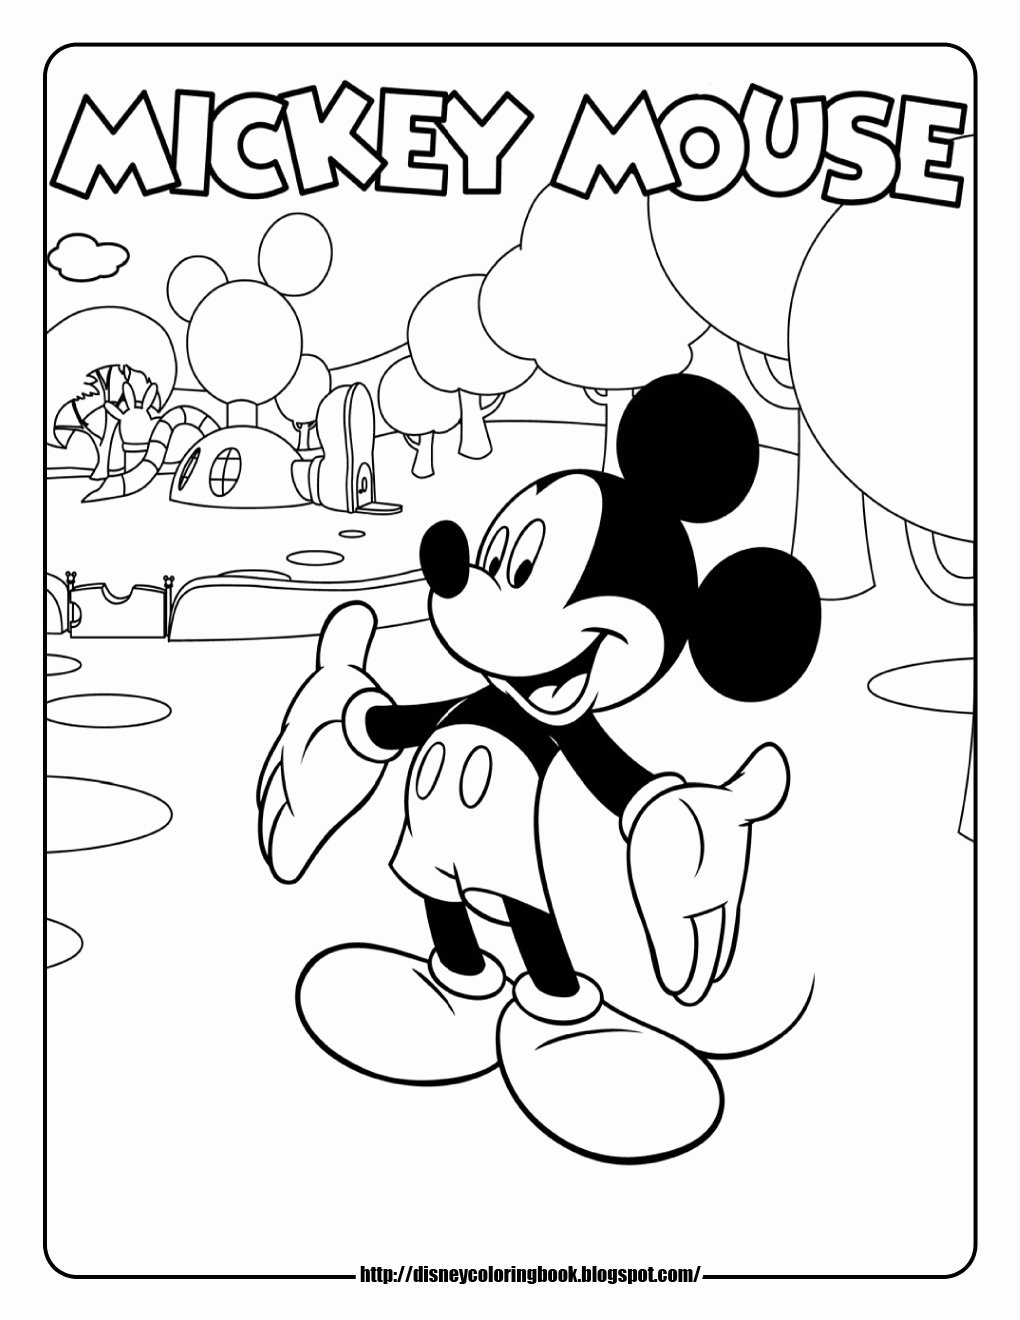 Mickey Mouse Colouring Sheets Unique Disney Coloring Pages and Sheets for Kids Mickey Mouse